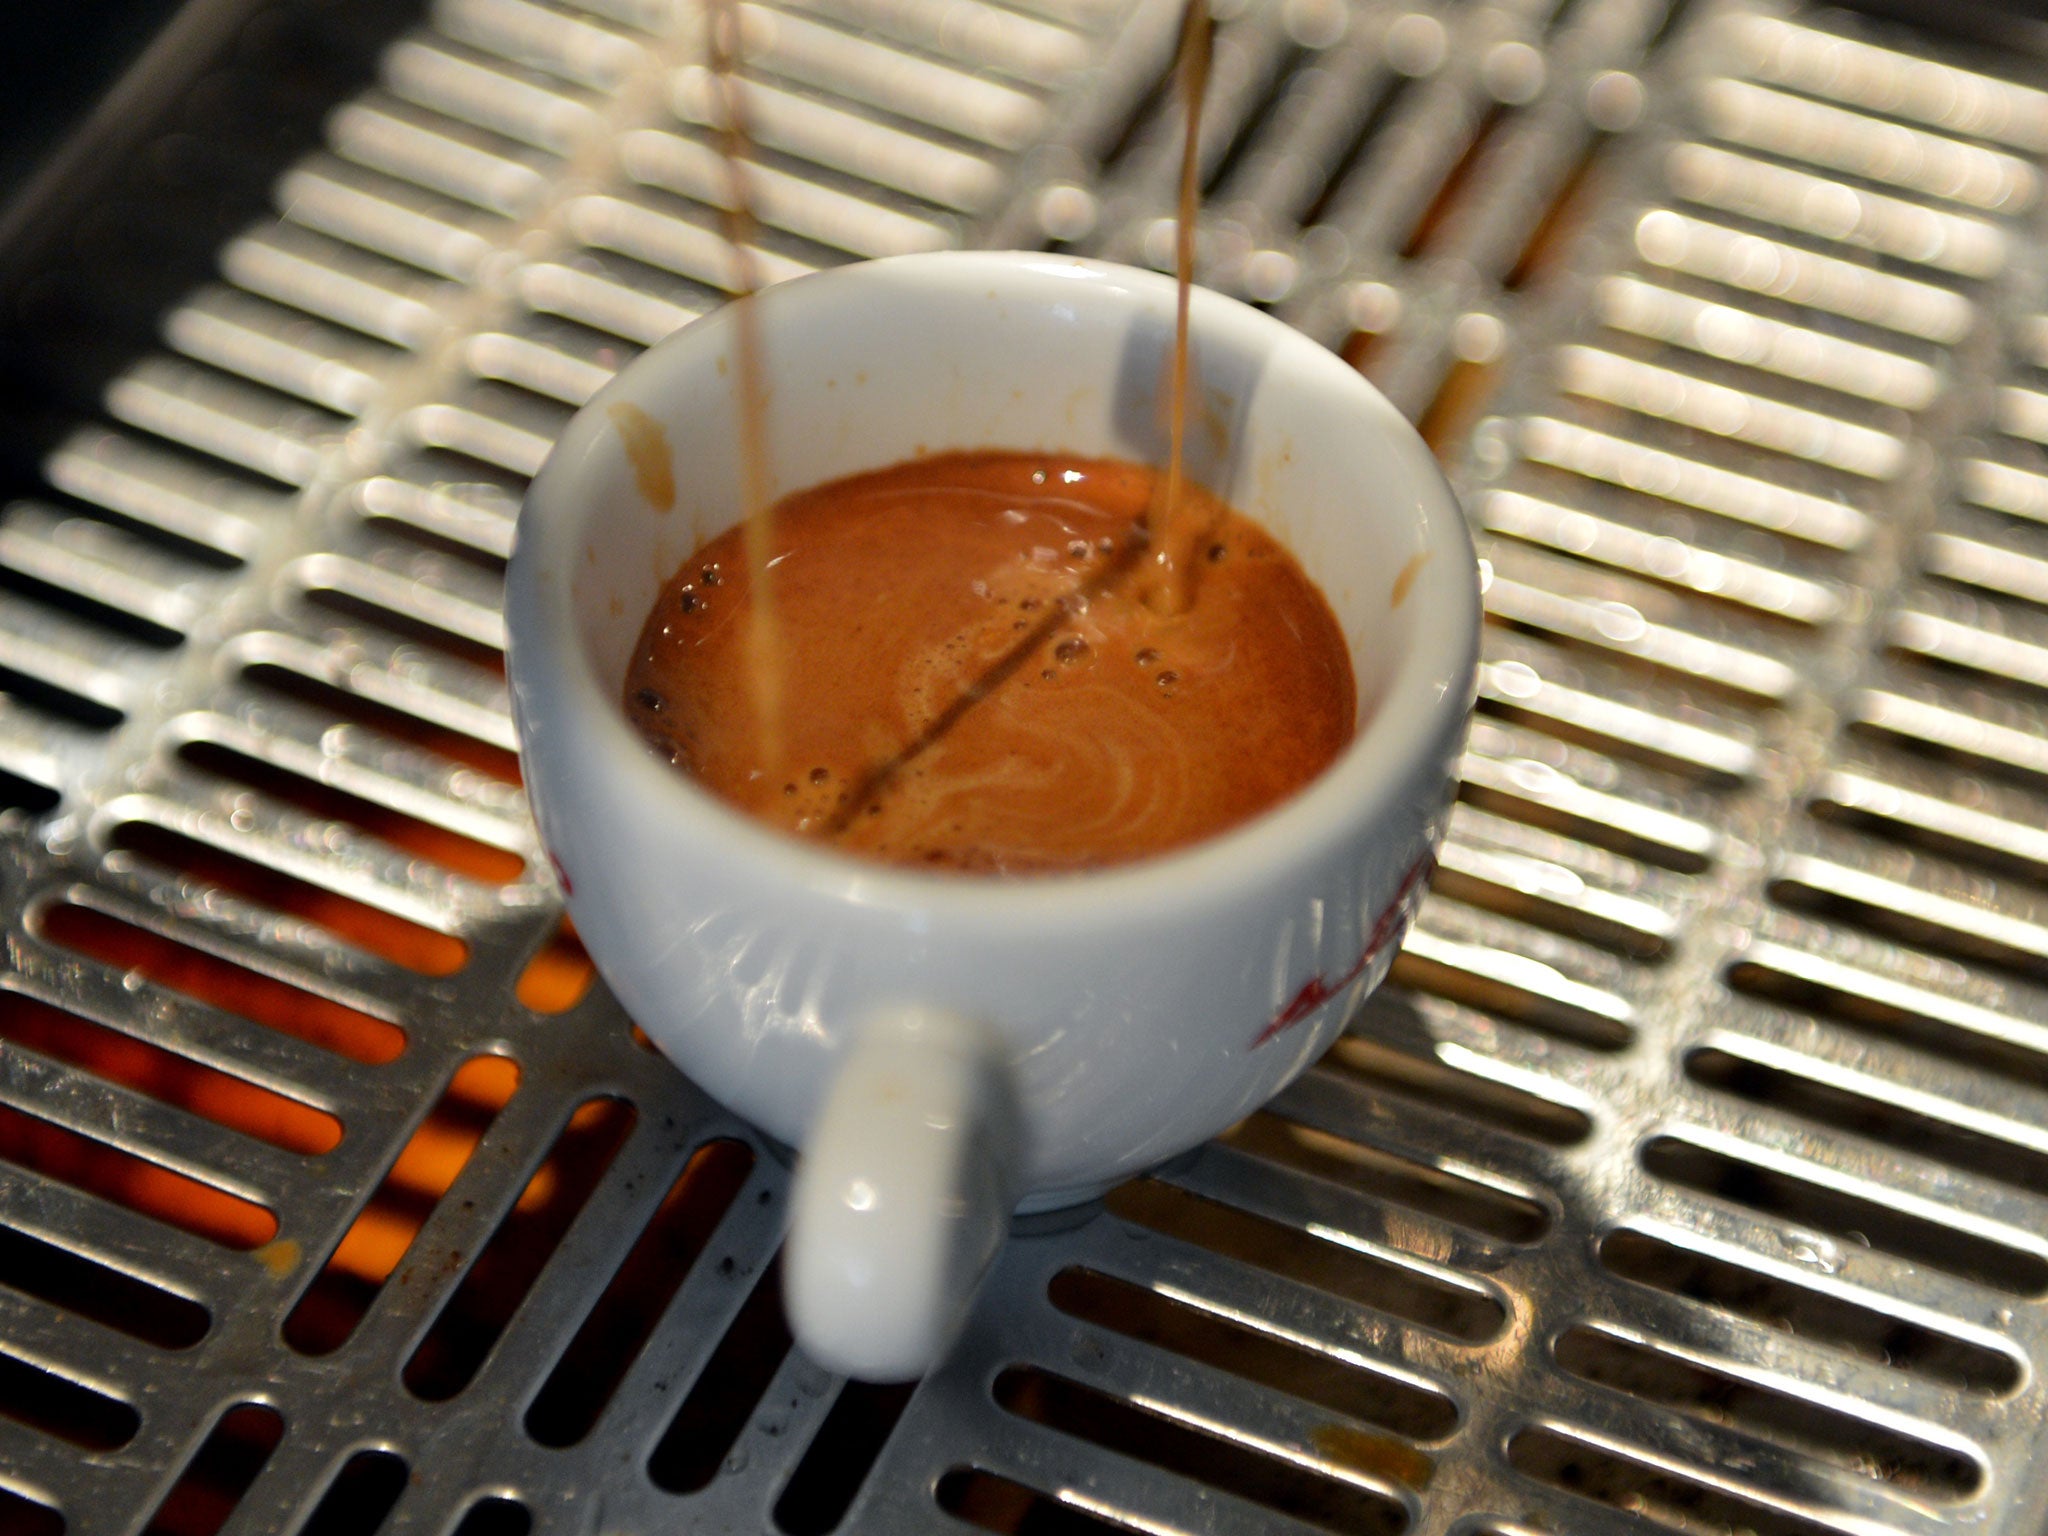 ABC of espresso: what good looks like